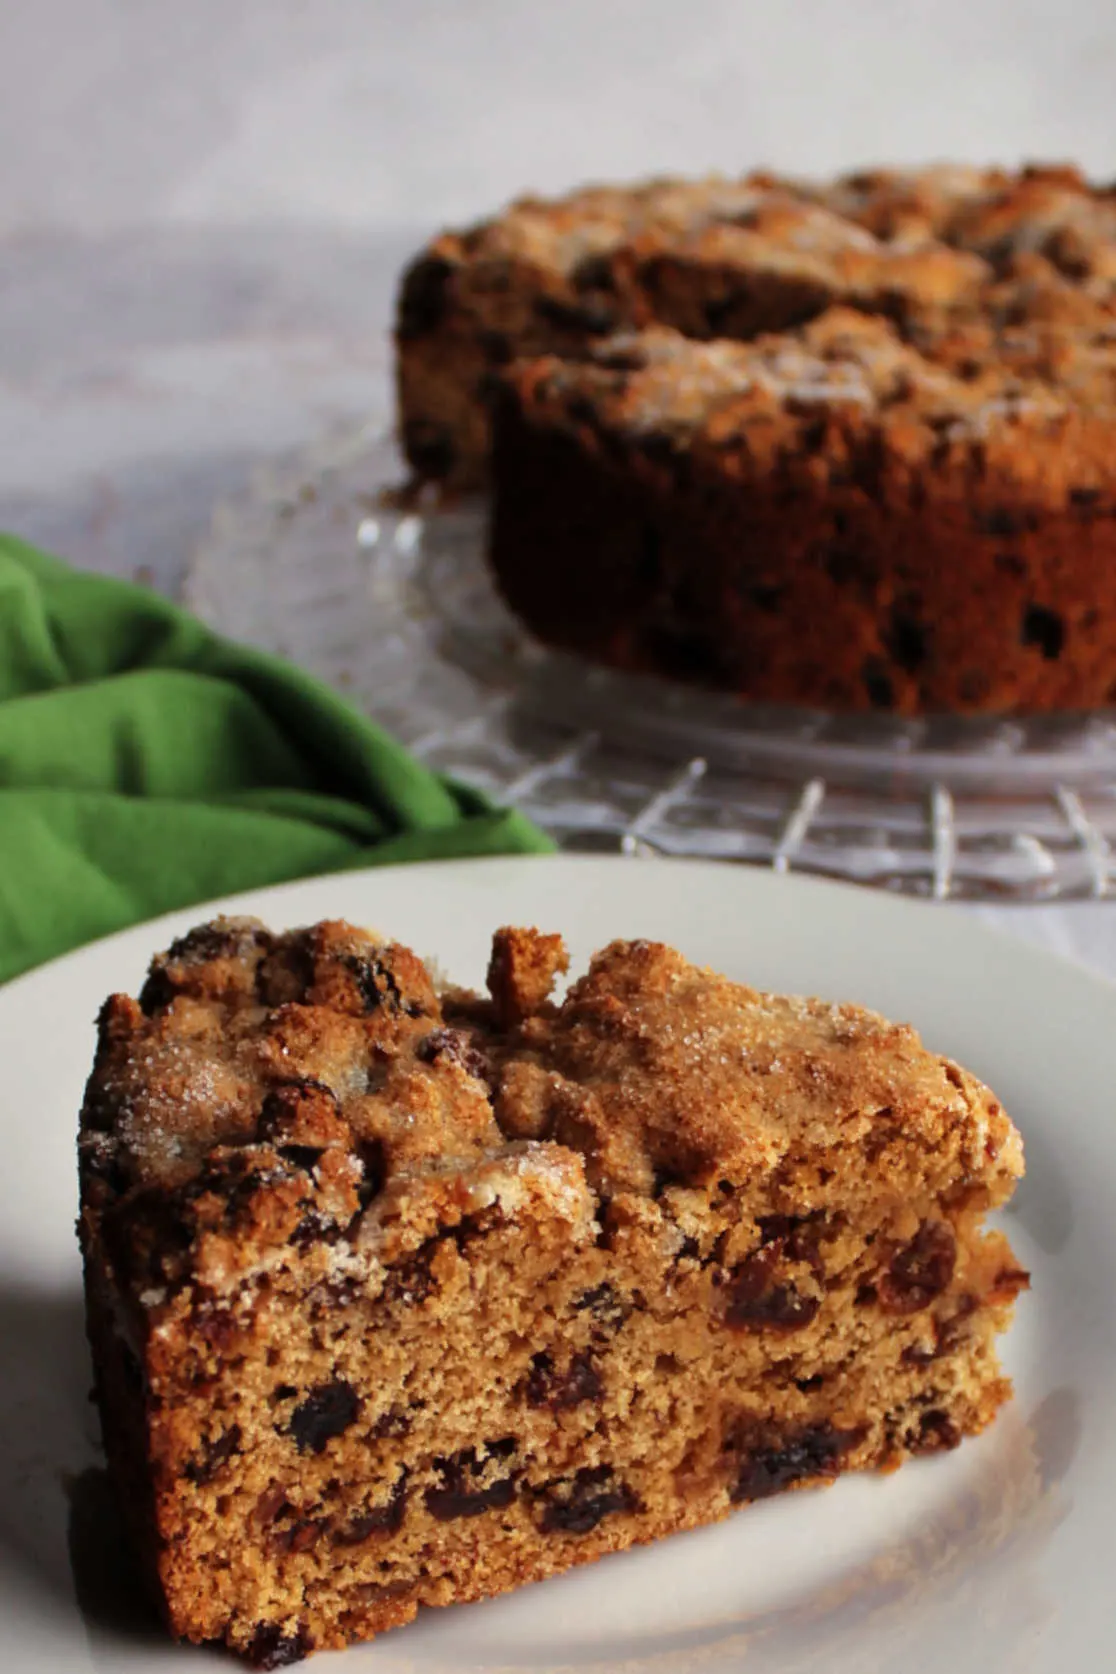 Close slice of Irish tea brack with soft brown bready interior dotted with loads of plumped up raisins and dates.